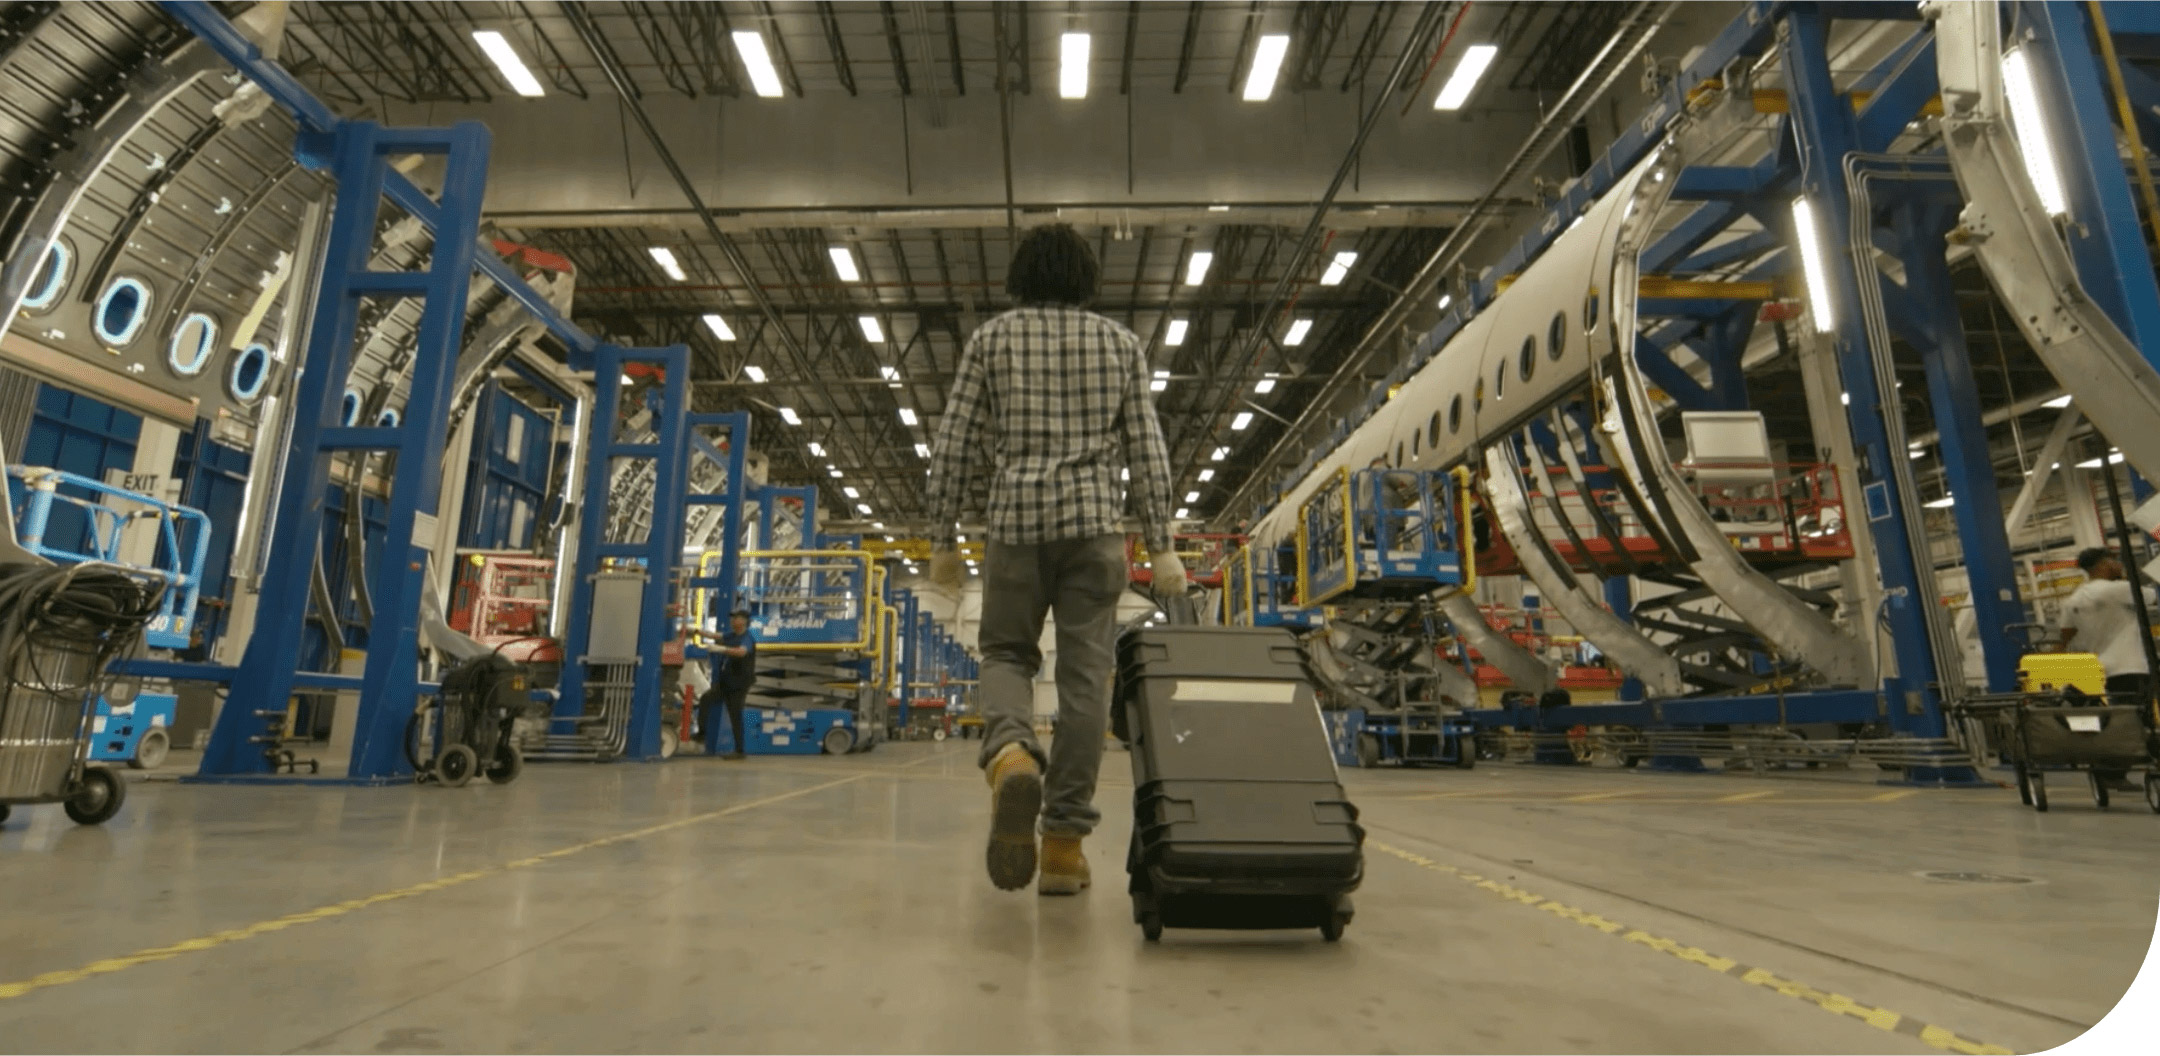 Video still of man walking away with a suitcase in an industrial warehouse.